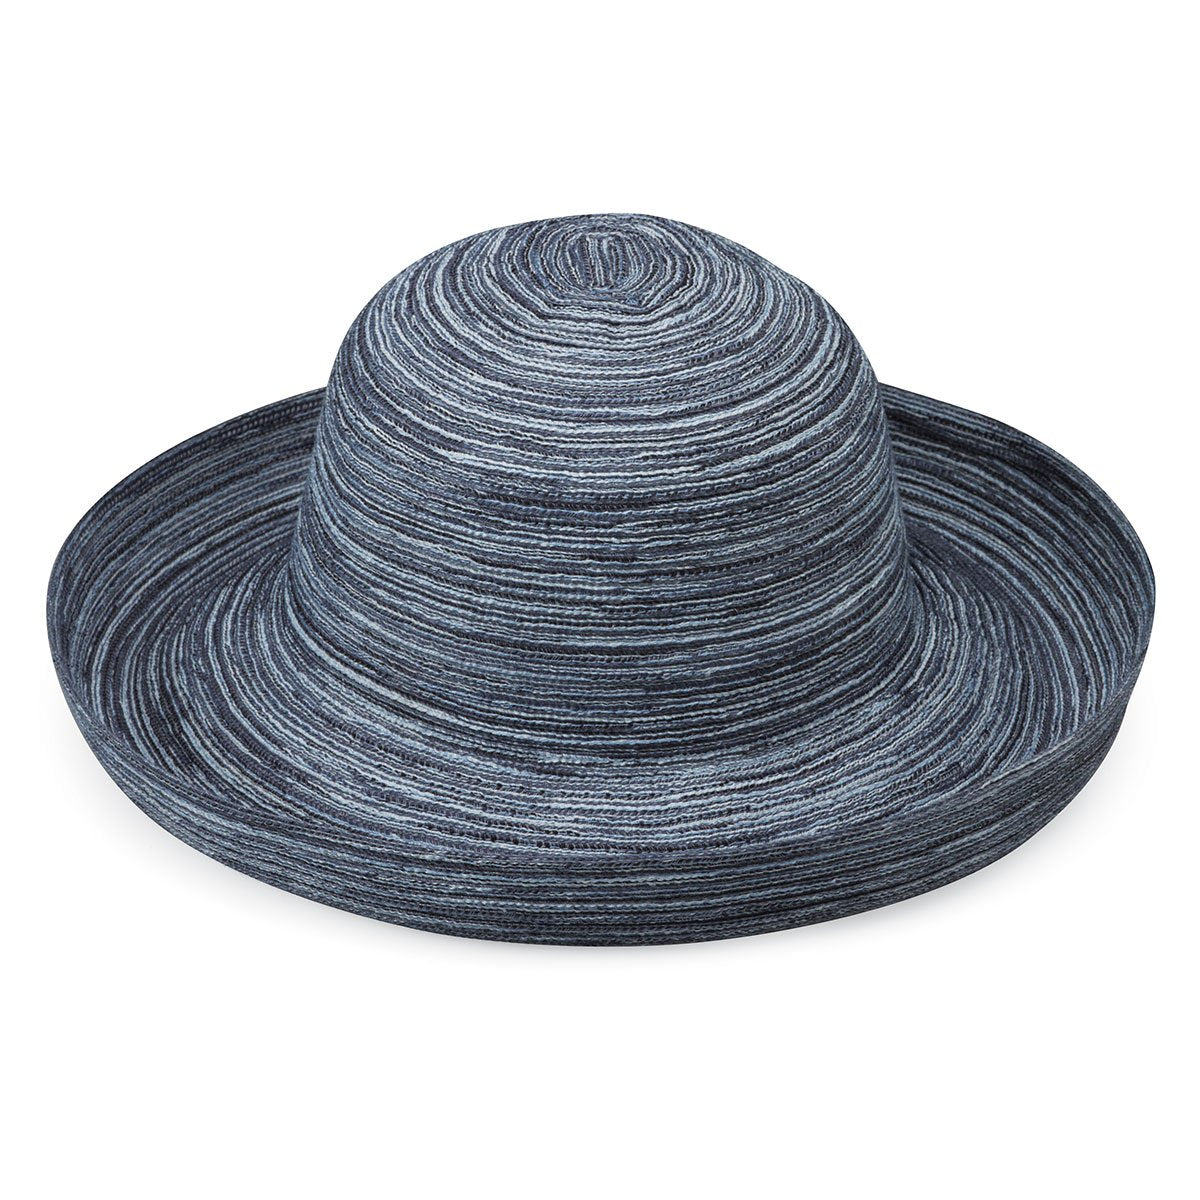 Featuring Front of Women's Packable Wide Brim Crown Style Sydney UPF Sun Hat in Denim from Wallaroo